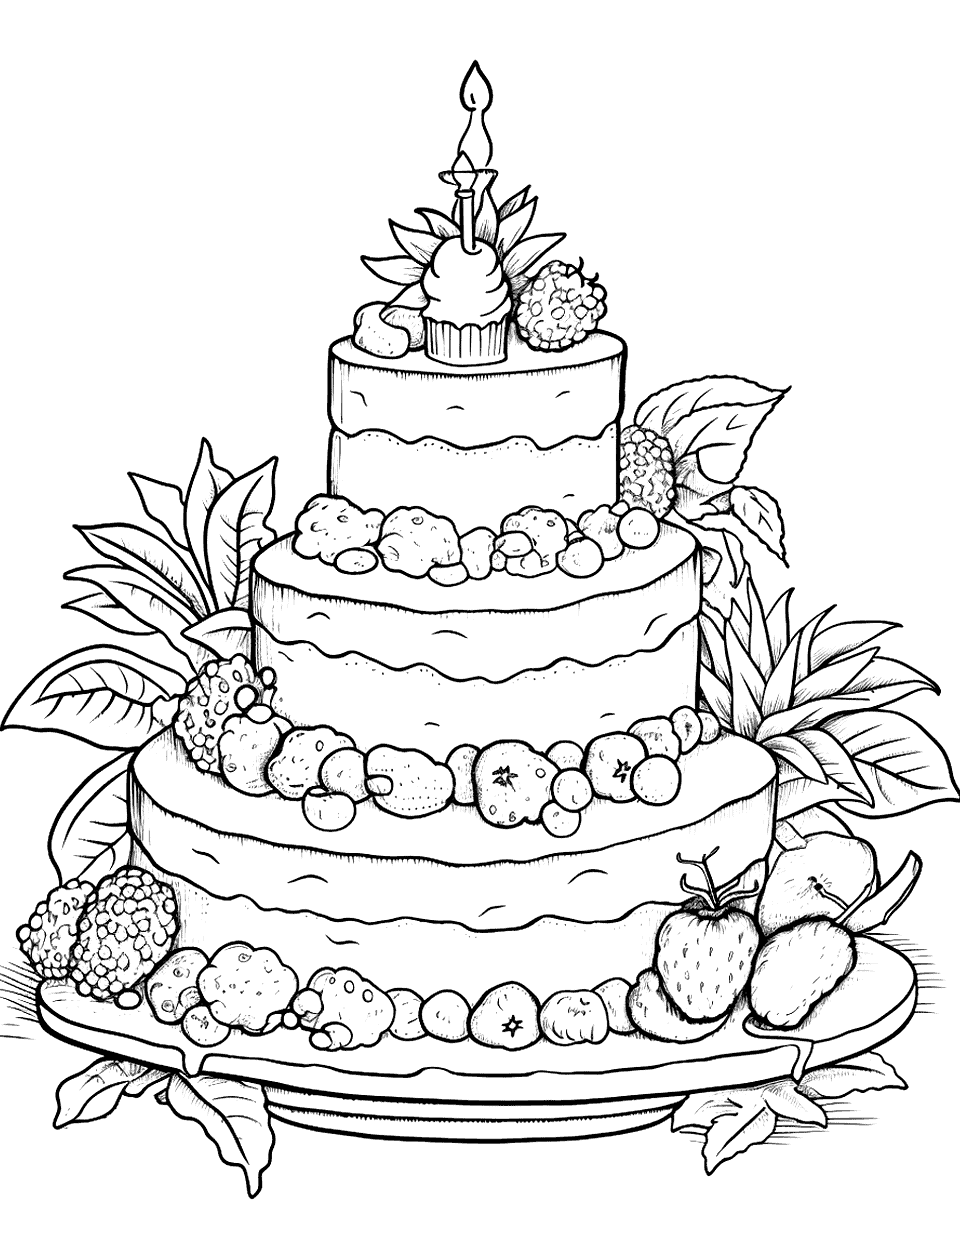 Rainforest Rendezvous Cake Coloring Page - A cake with a rainforest theme.